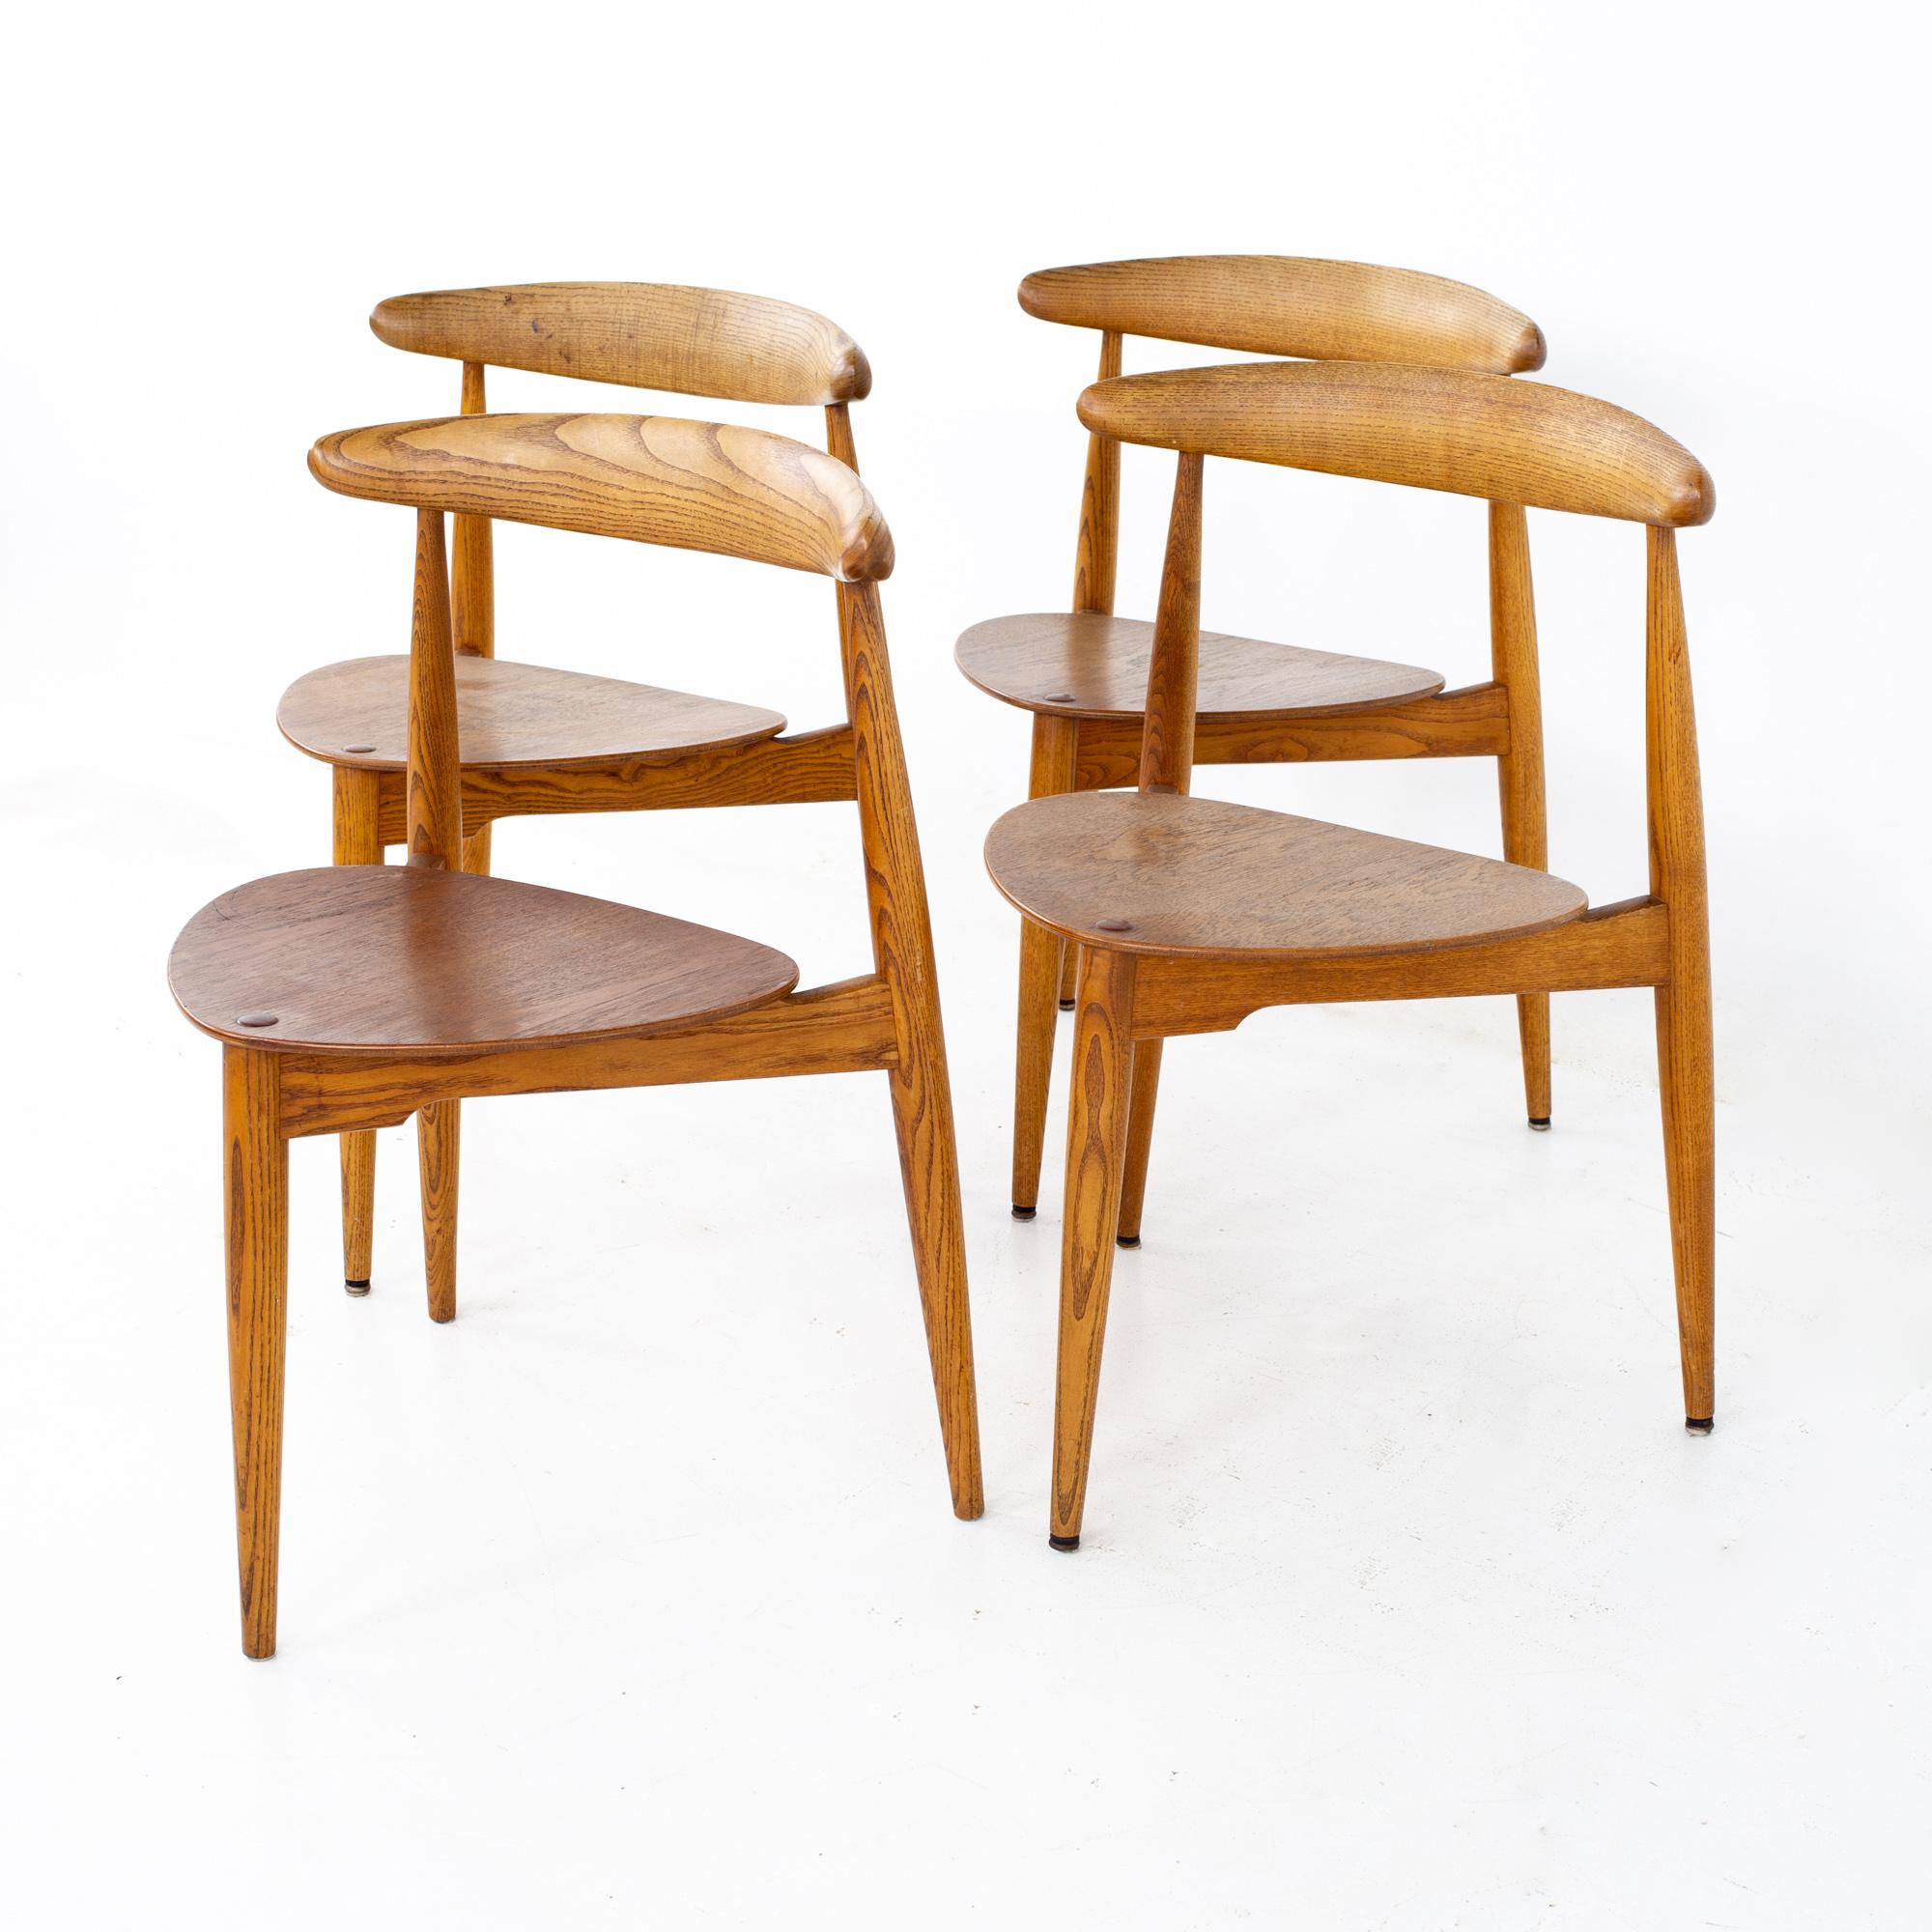 Hans Olsen mid century teak dining chairs - Set of 4
Each chair measures: 19 wide x 17 deep x 28.5 high, with a seat height of 17 inches 

All pieces of furniture can be had in what we call restored vintage condition. That means the piece is